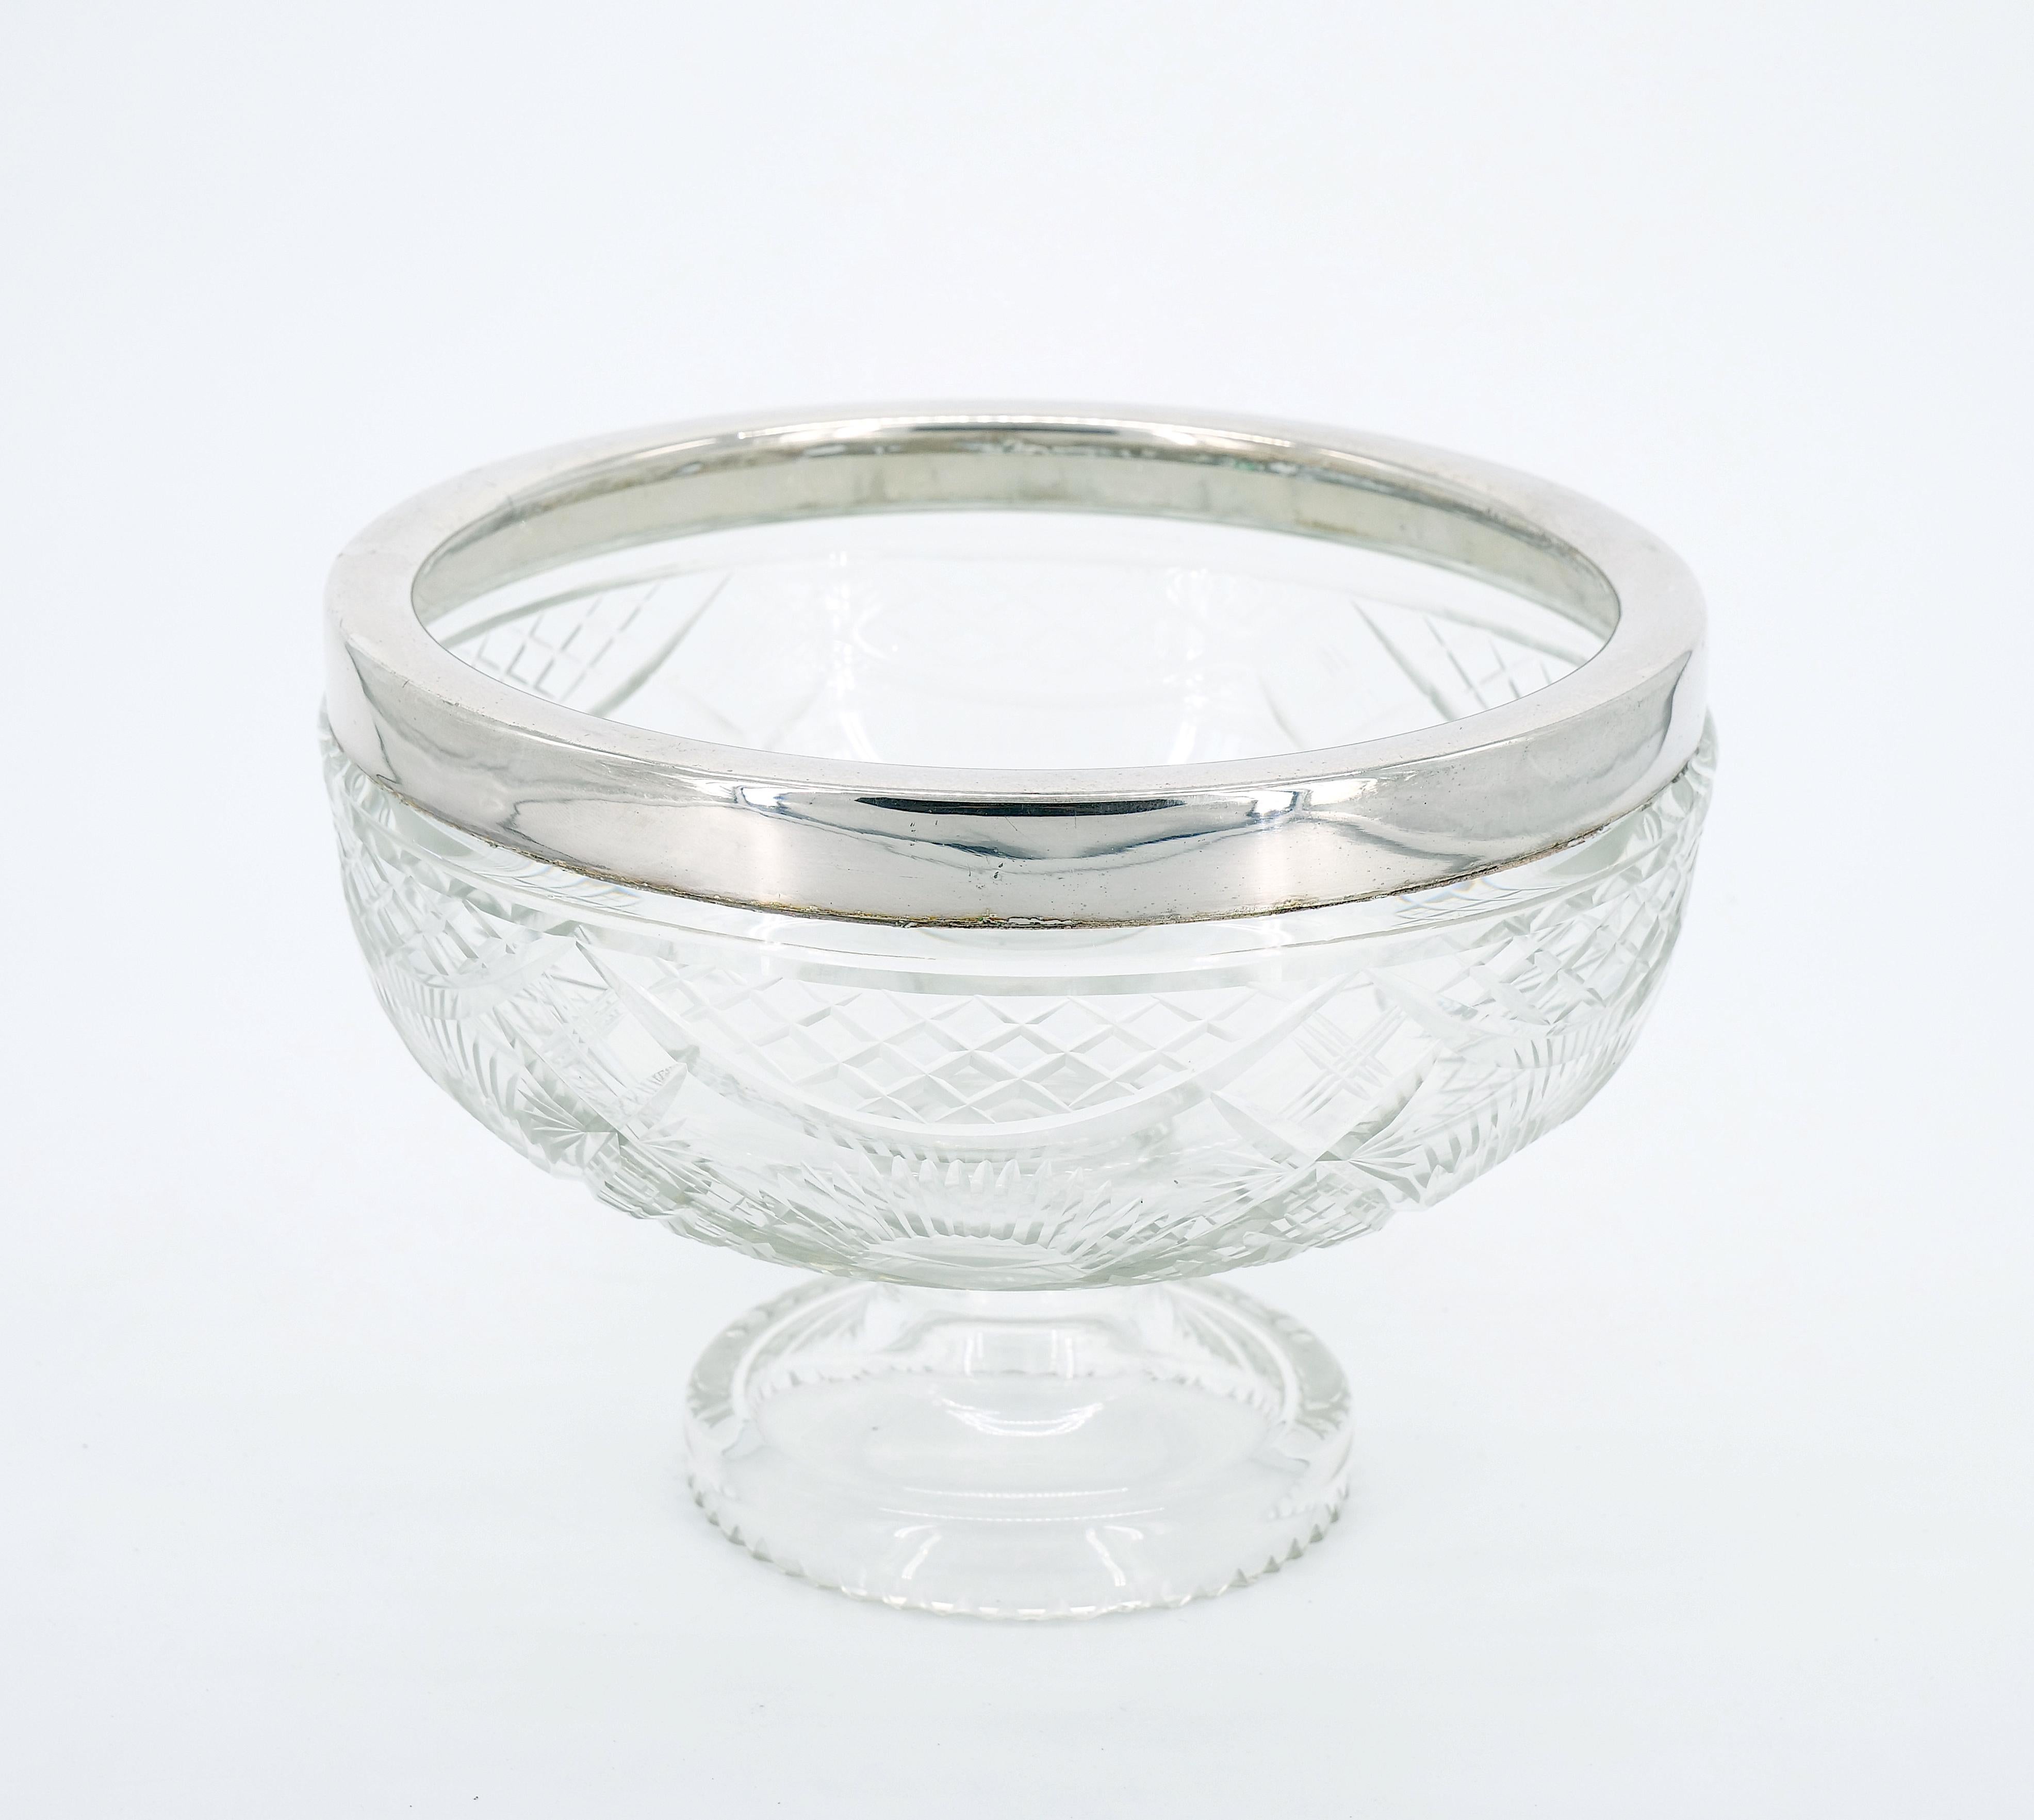 English Silver Plate Framed Top / Cut Glass Footed Serving Bowl For Sale 4